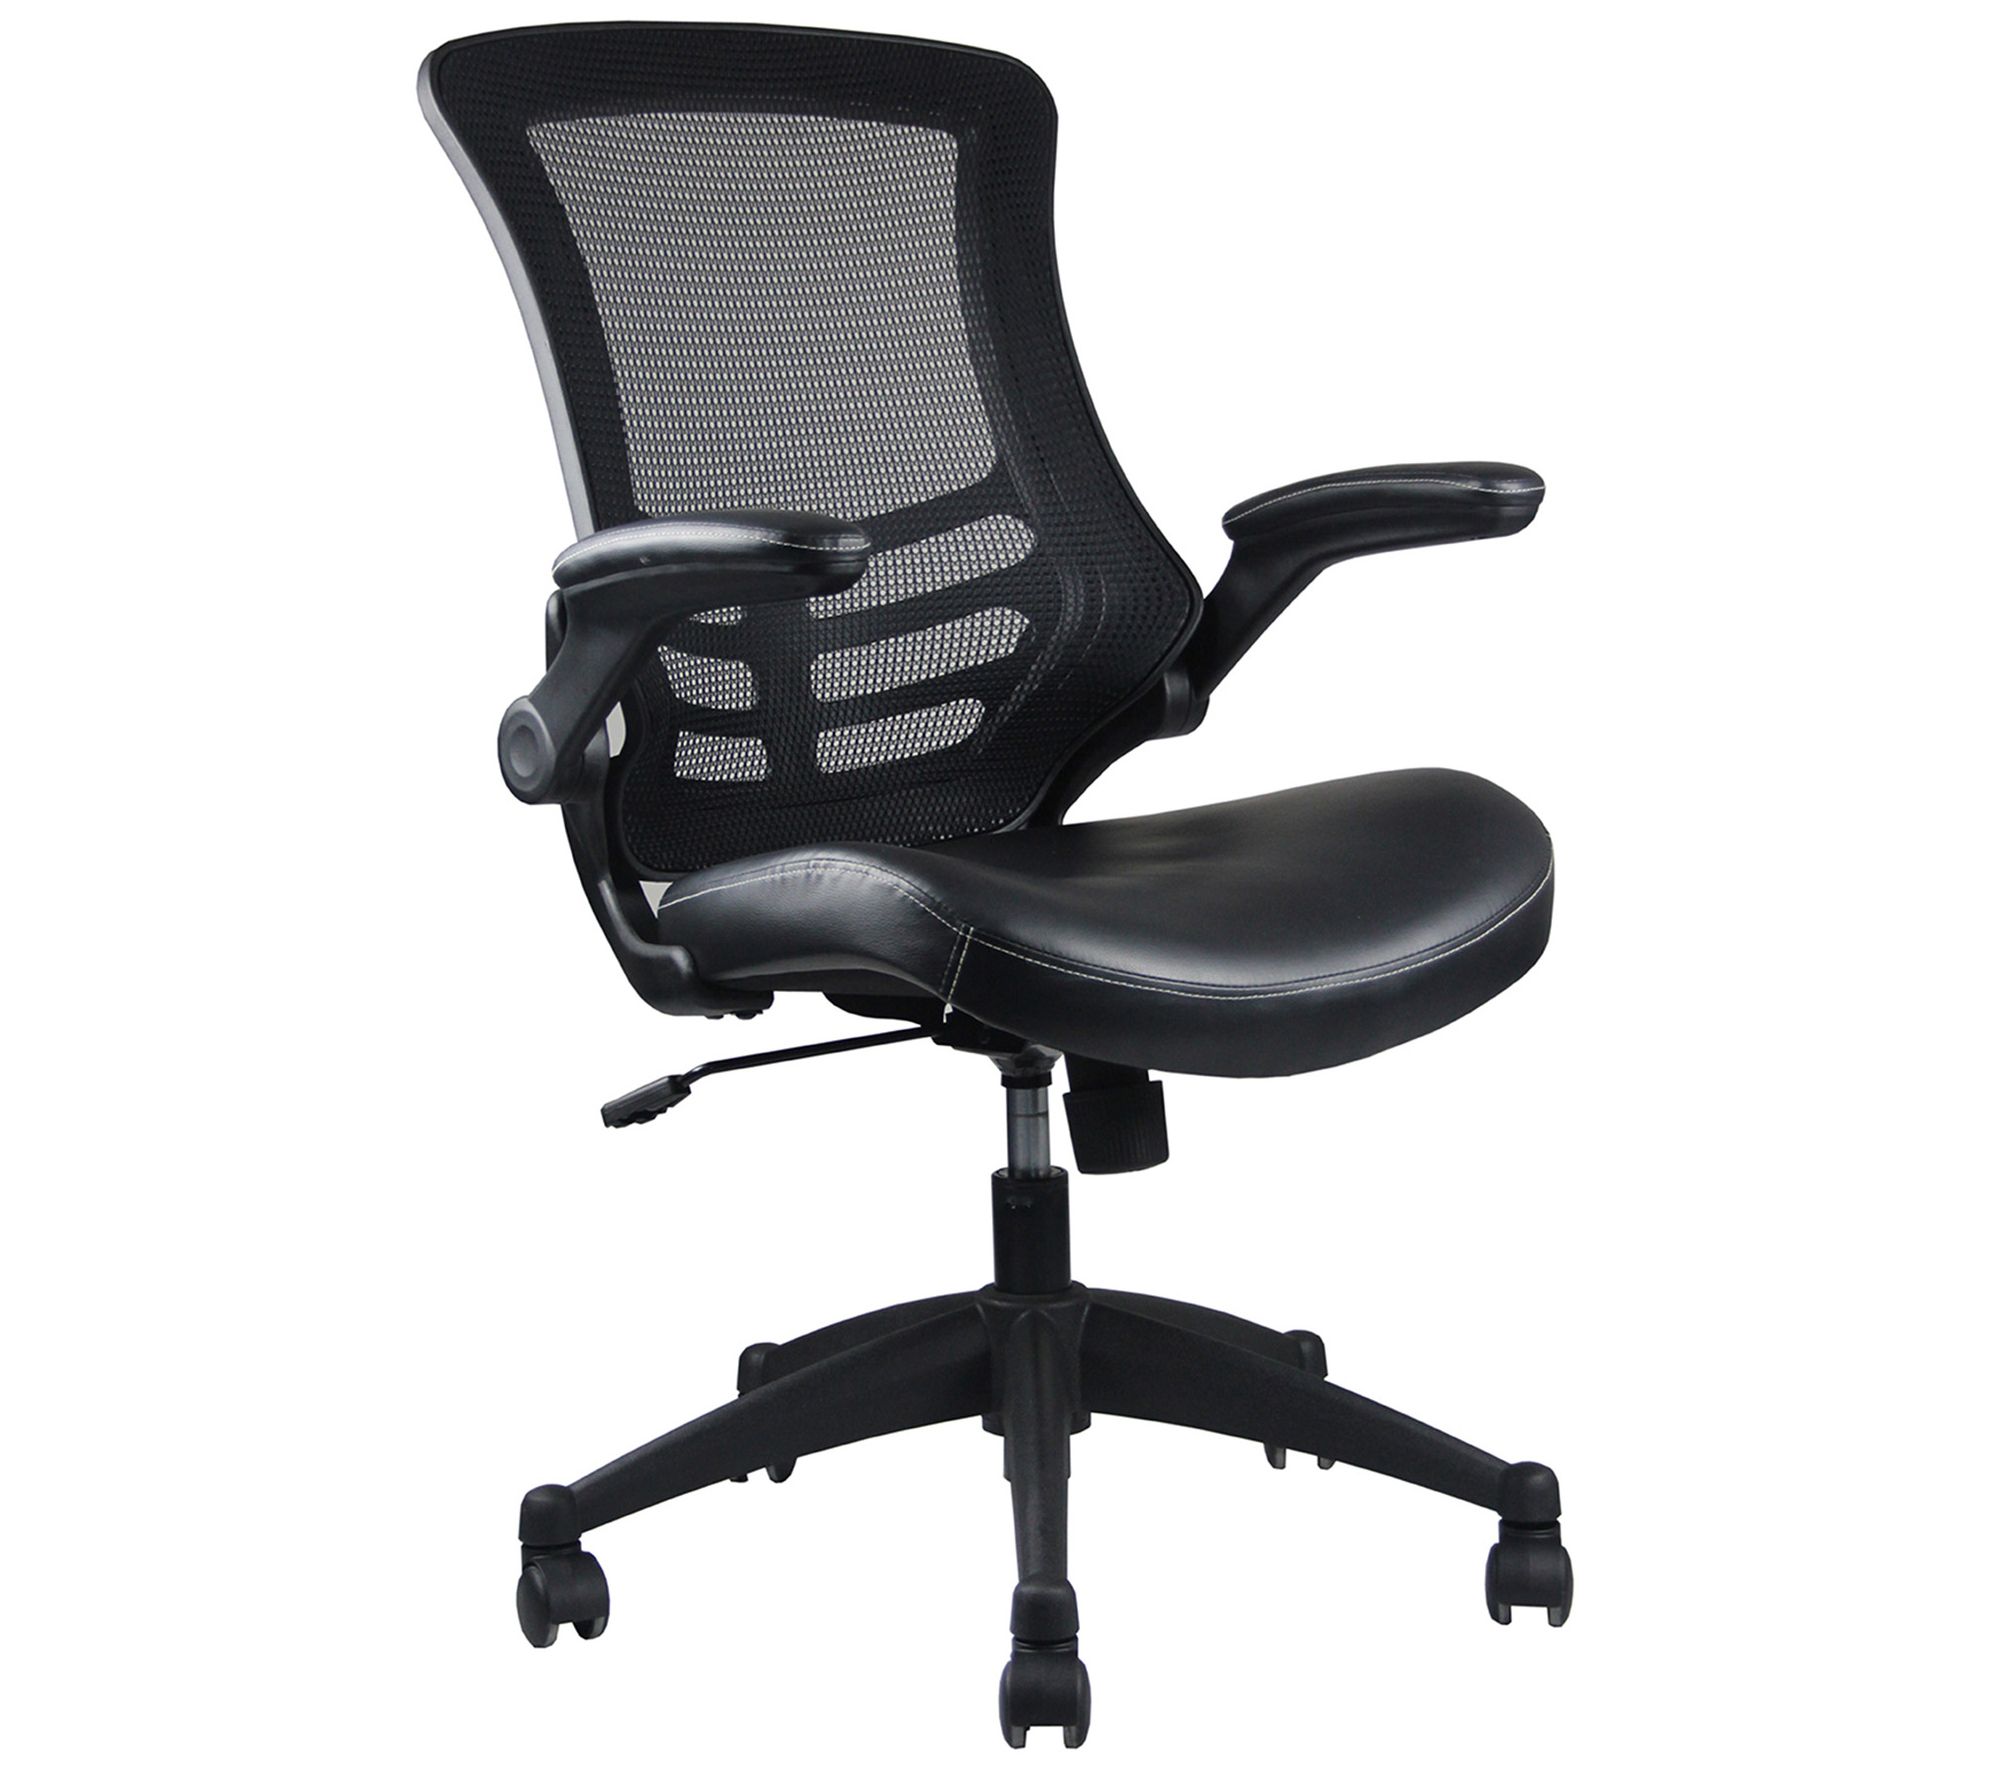 Techni Mobili Black Mesh Task Office Chair with Flip Up Arms